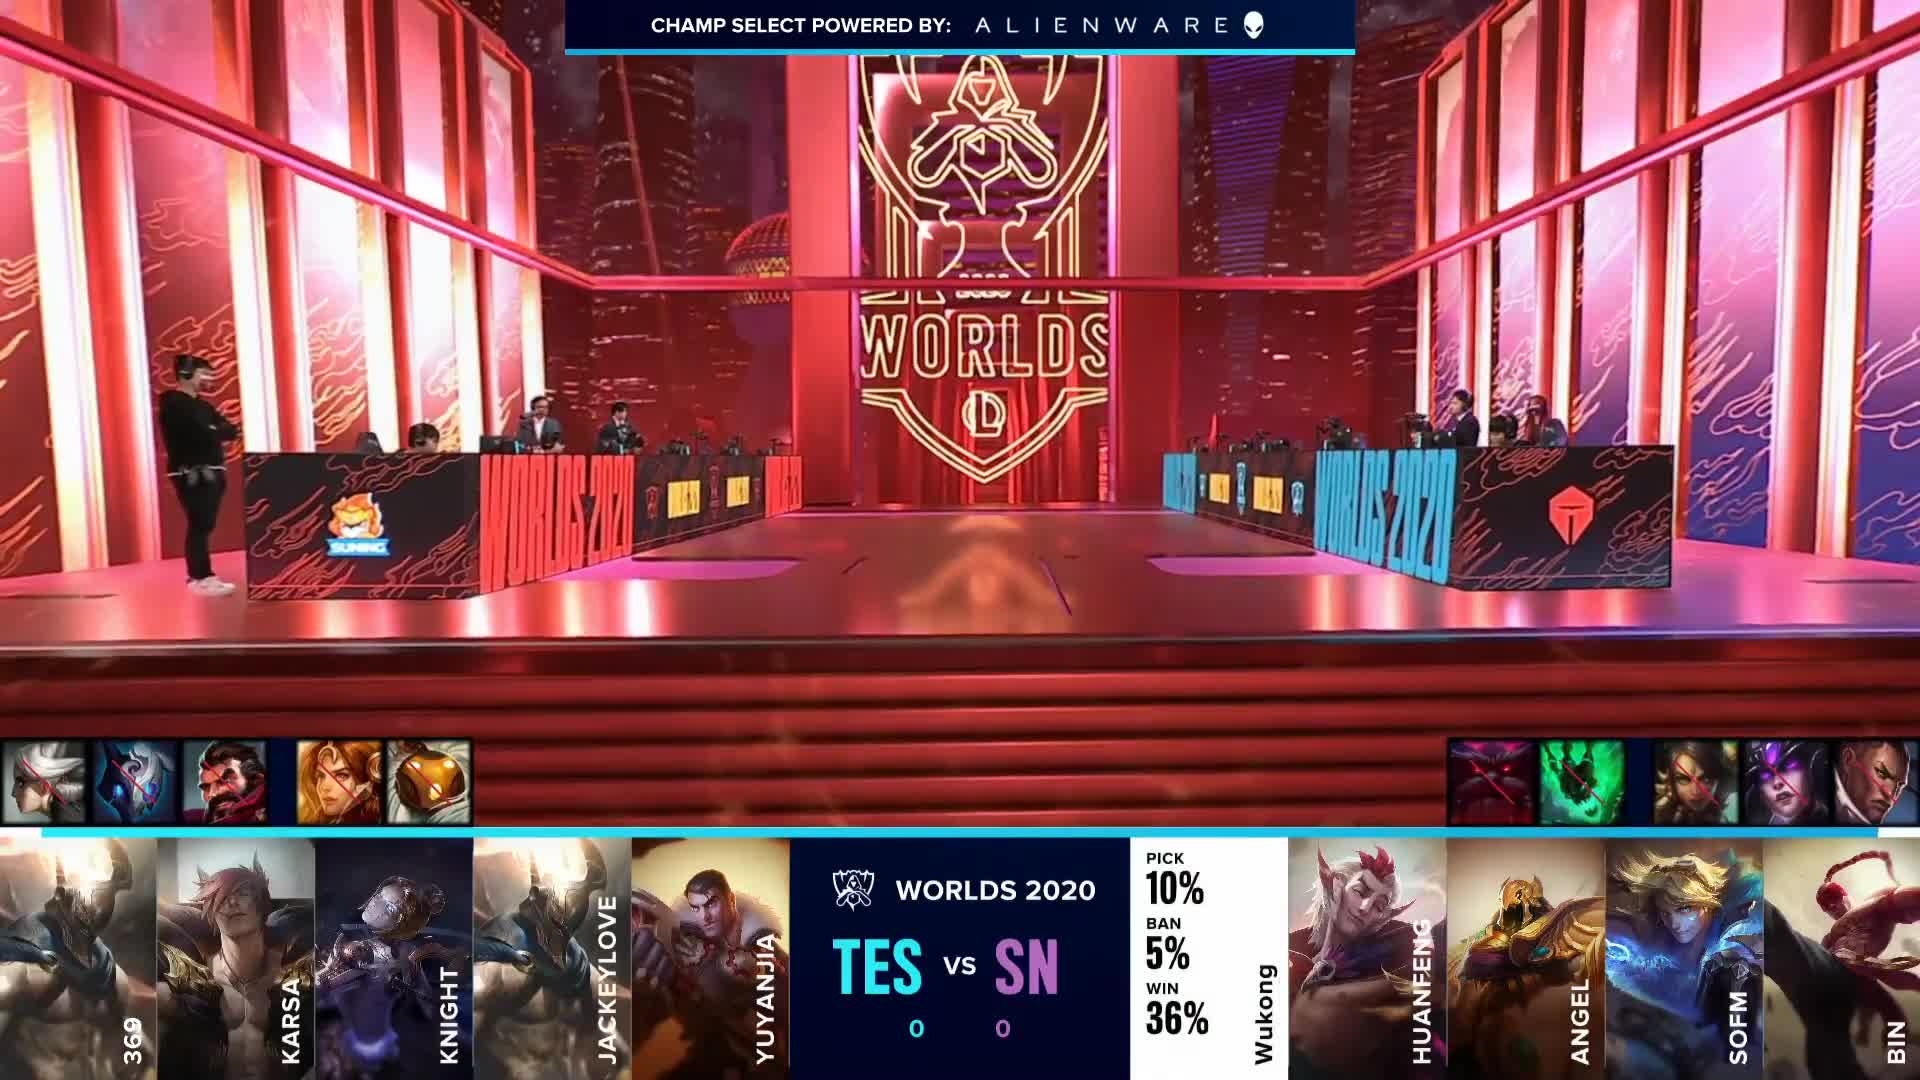 TES vs SN Highlights Game 1 - Semifinals Worlds 2020 Playoffs - TOP Esports vs Suning G1